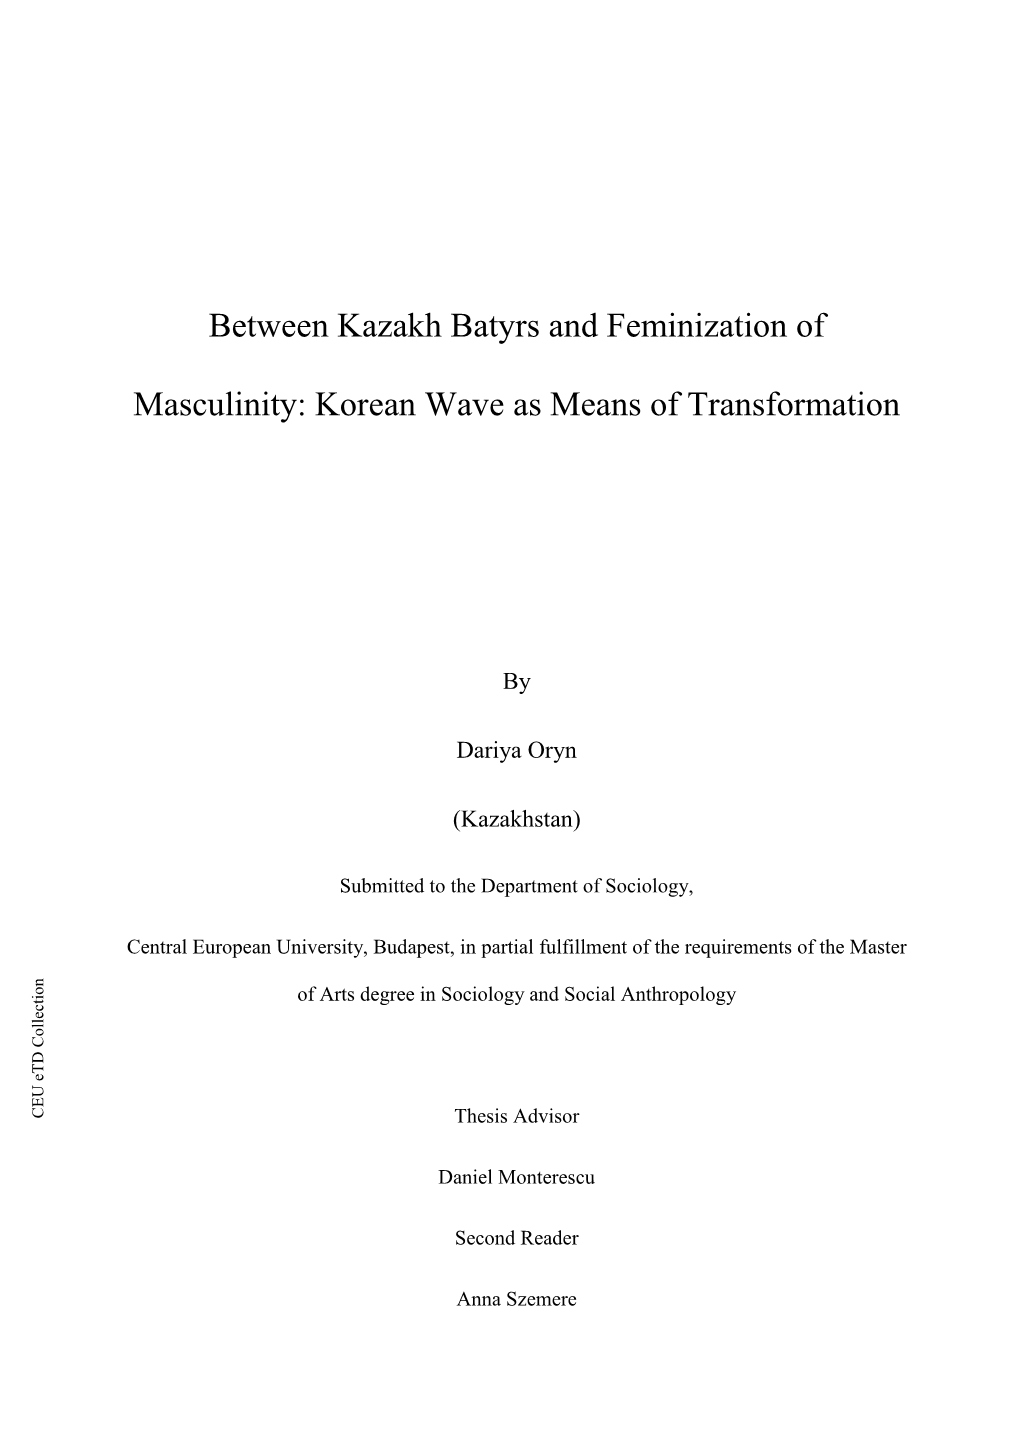 Between Kazakh Batyrs and Feminization of Masculinity: Korean Wave As Means of Transformation